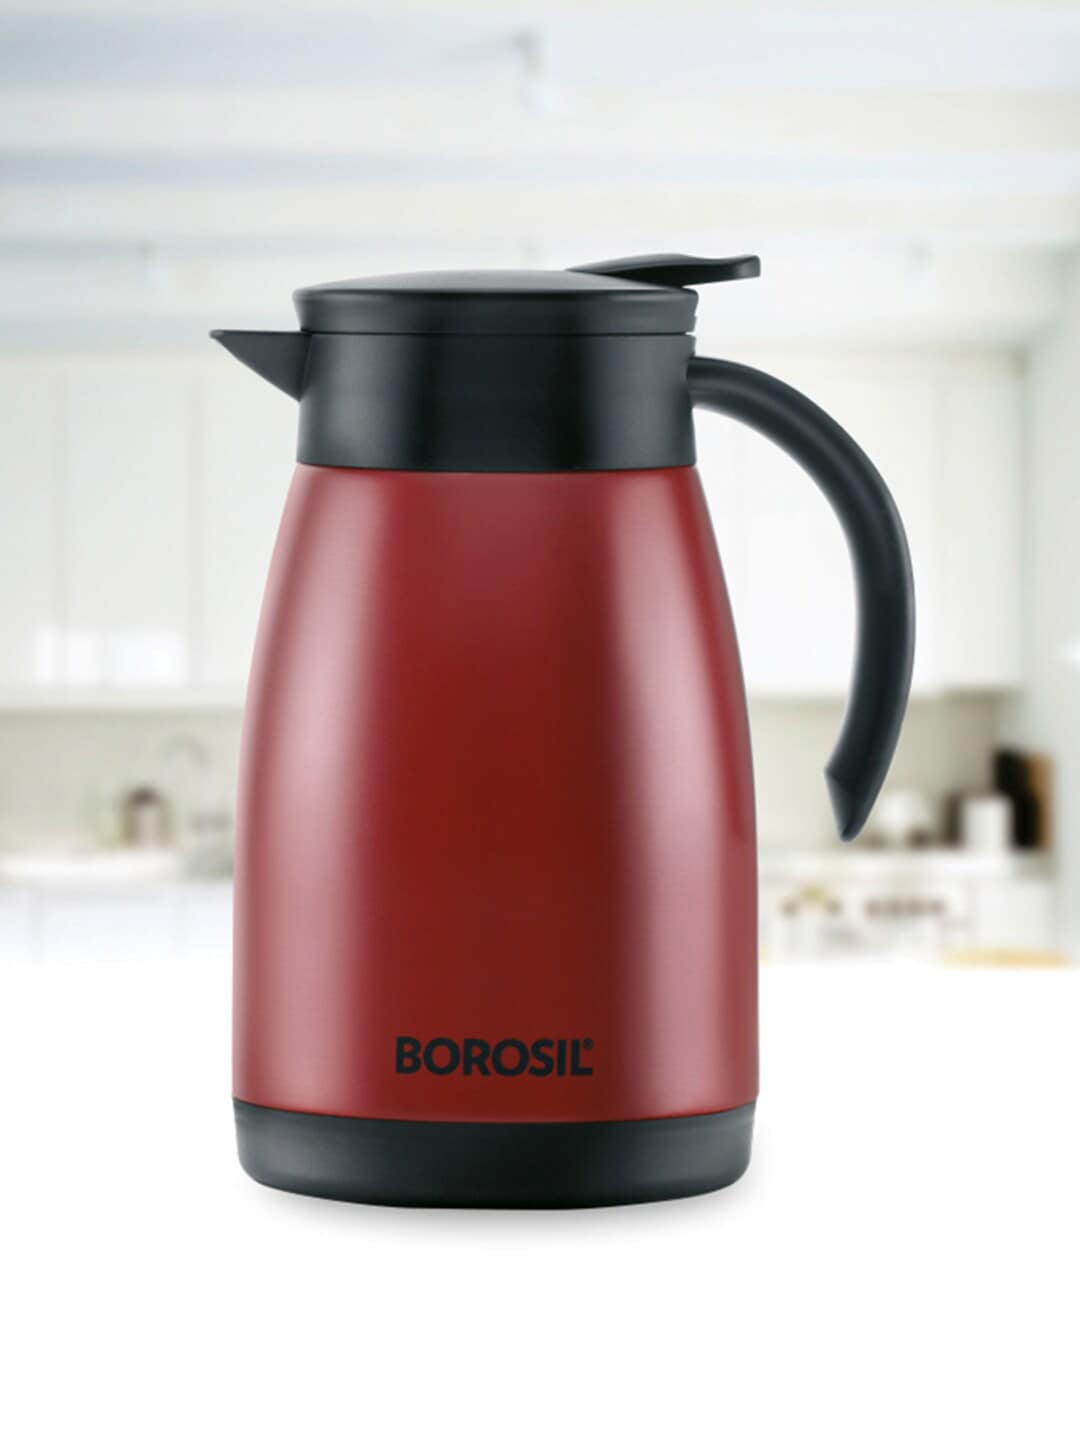 BOROSIL Red & Black Solid Stainless Steel Teapot Flask - 1.5L Price in India